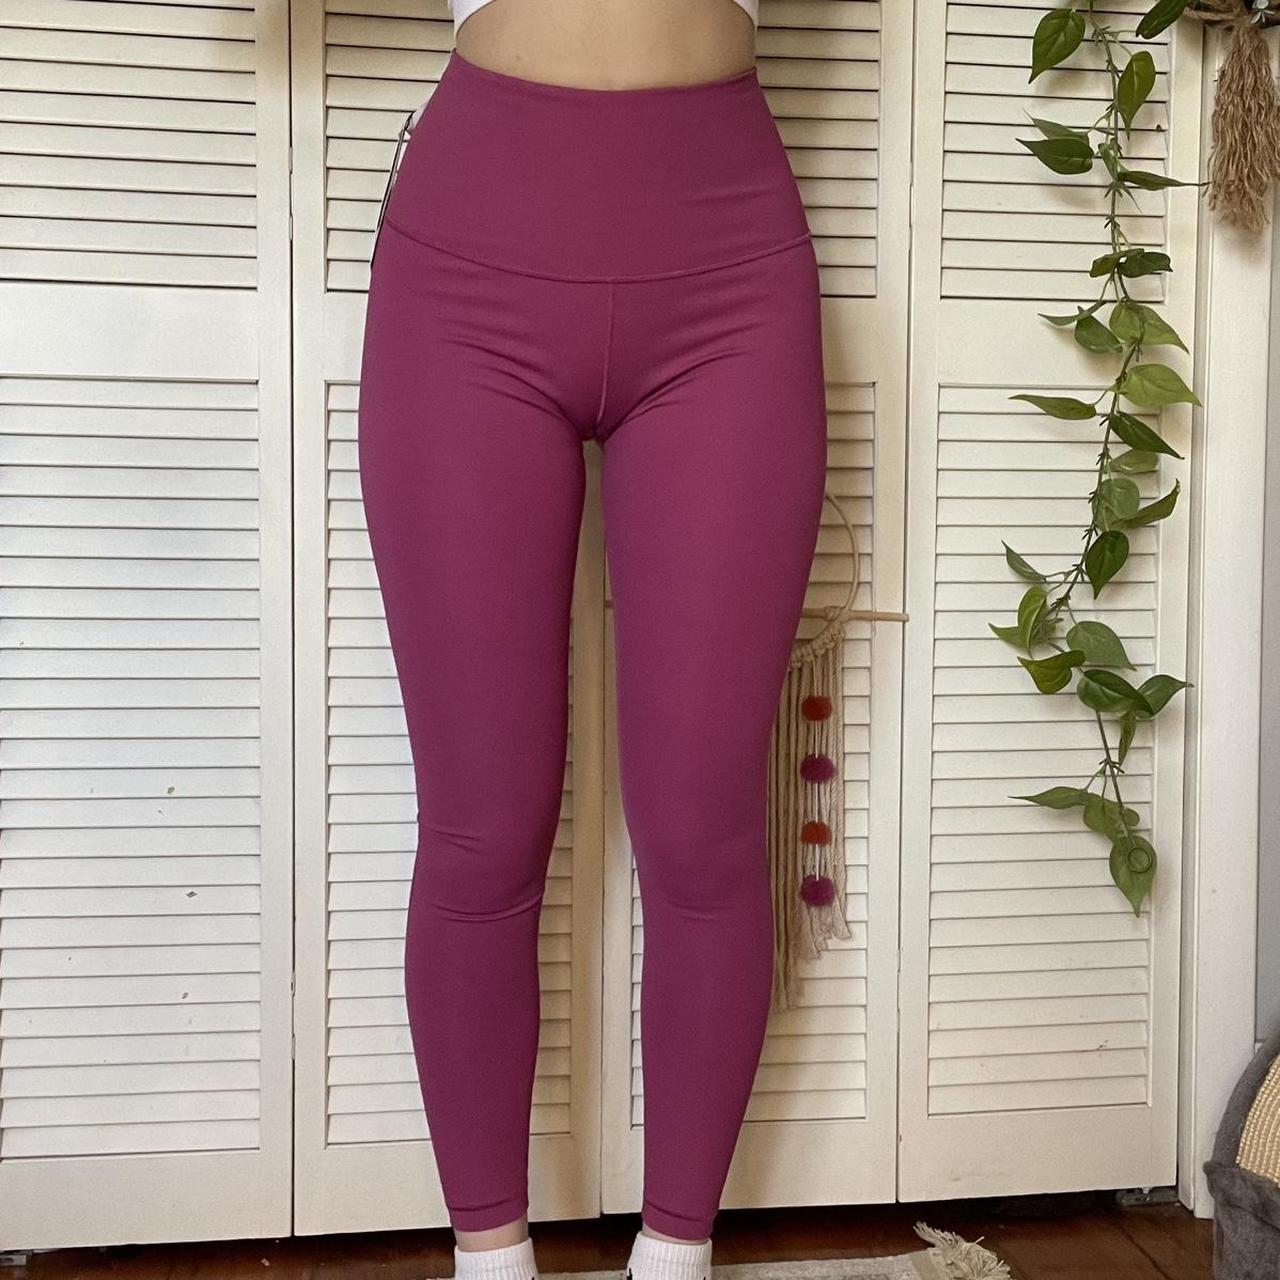 Calia by Carrie Underwood Purple Active Pants Size M - 58% off